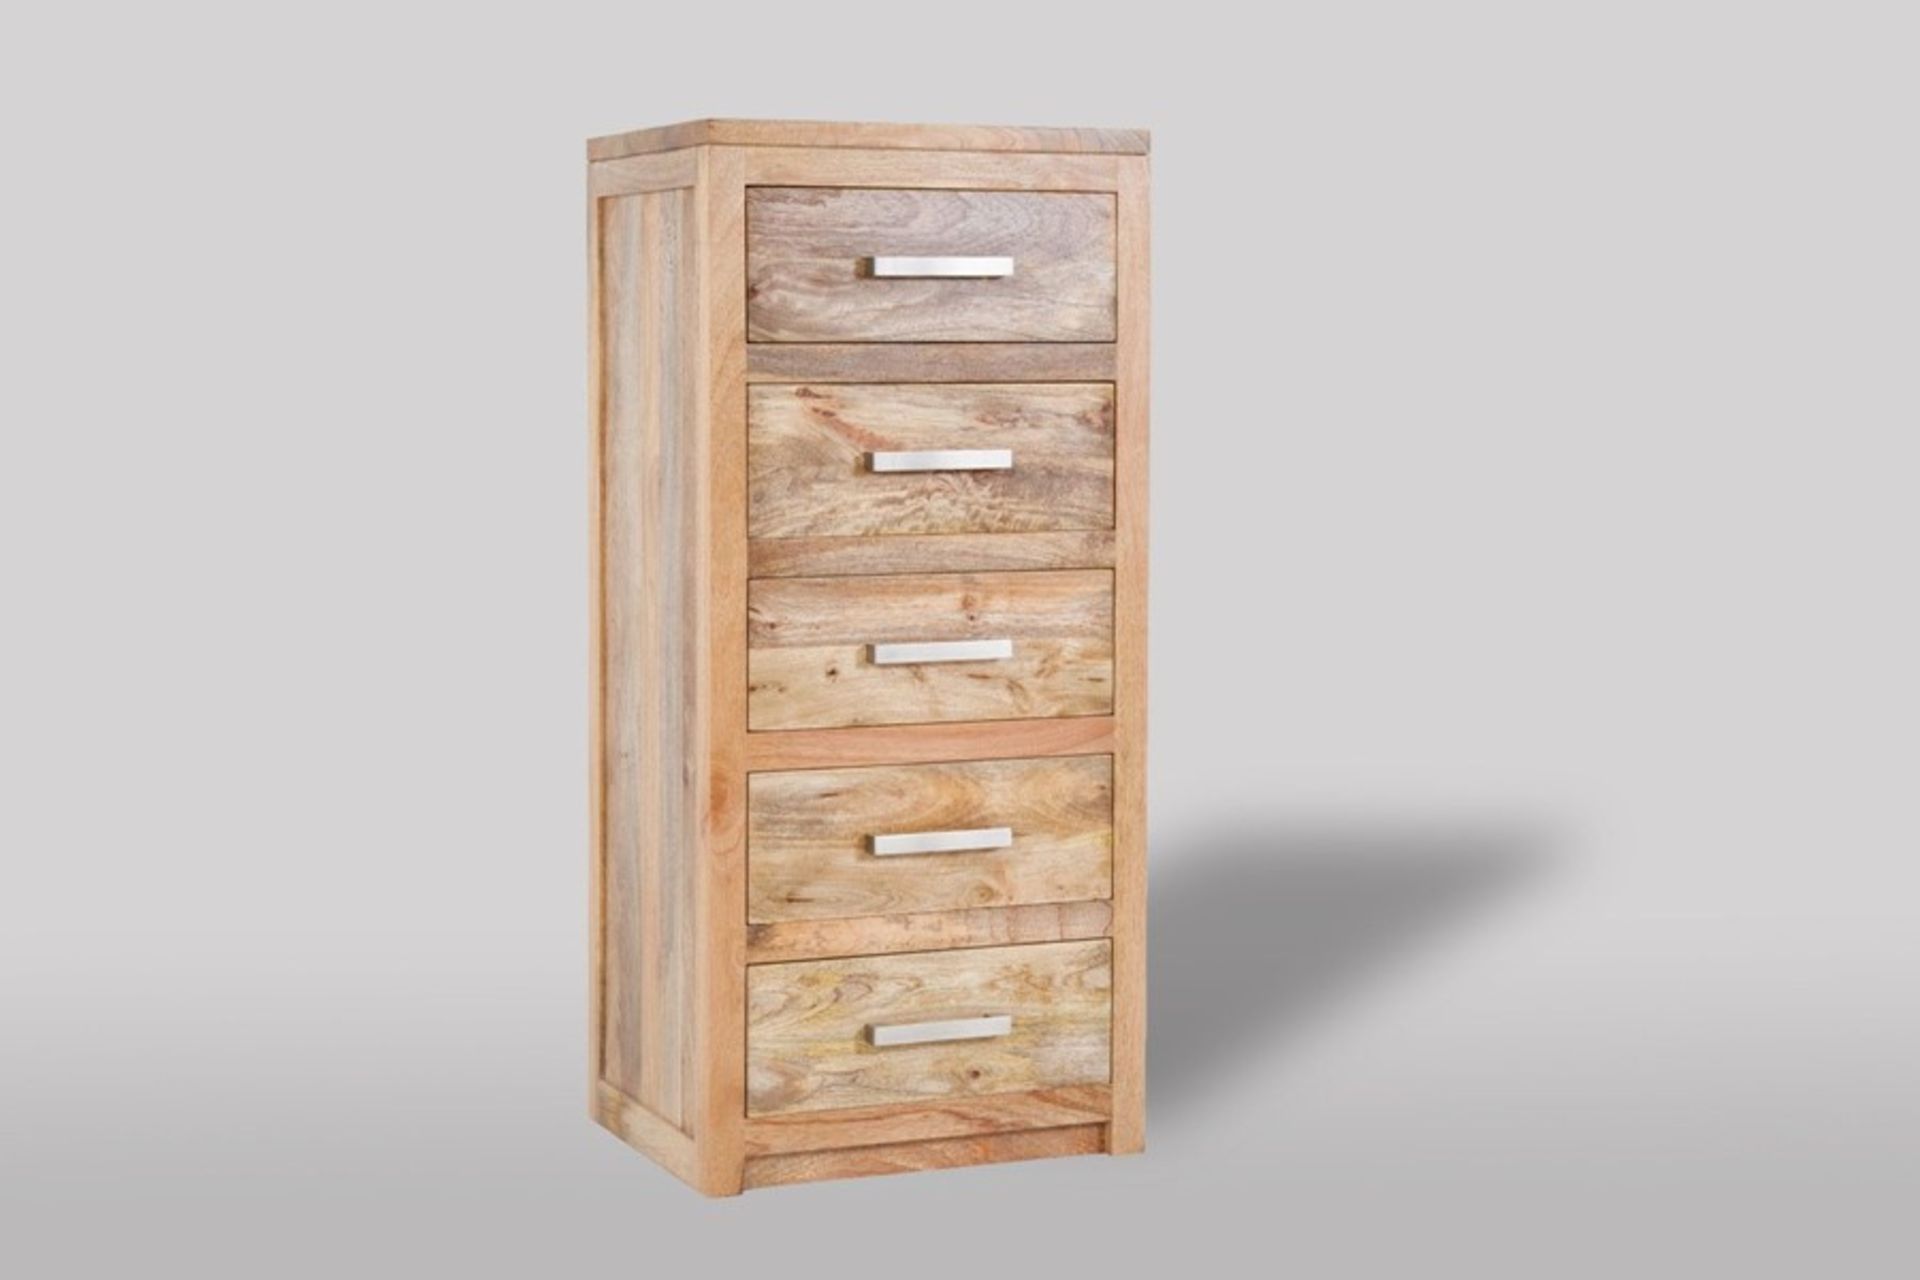 1 GRADE A BOXED BH BOSS MANGO WOOD 5 DRAWER TALLBOY CHEST FULLY ASSEMBLED SOLID WOOD / RRP £350.00